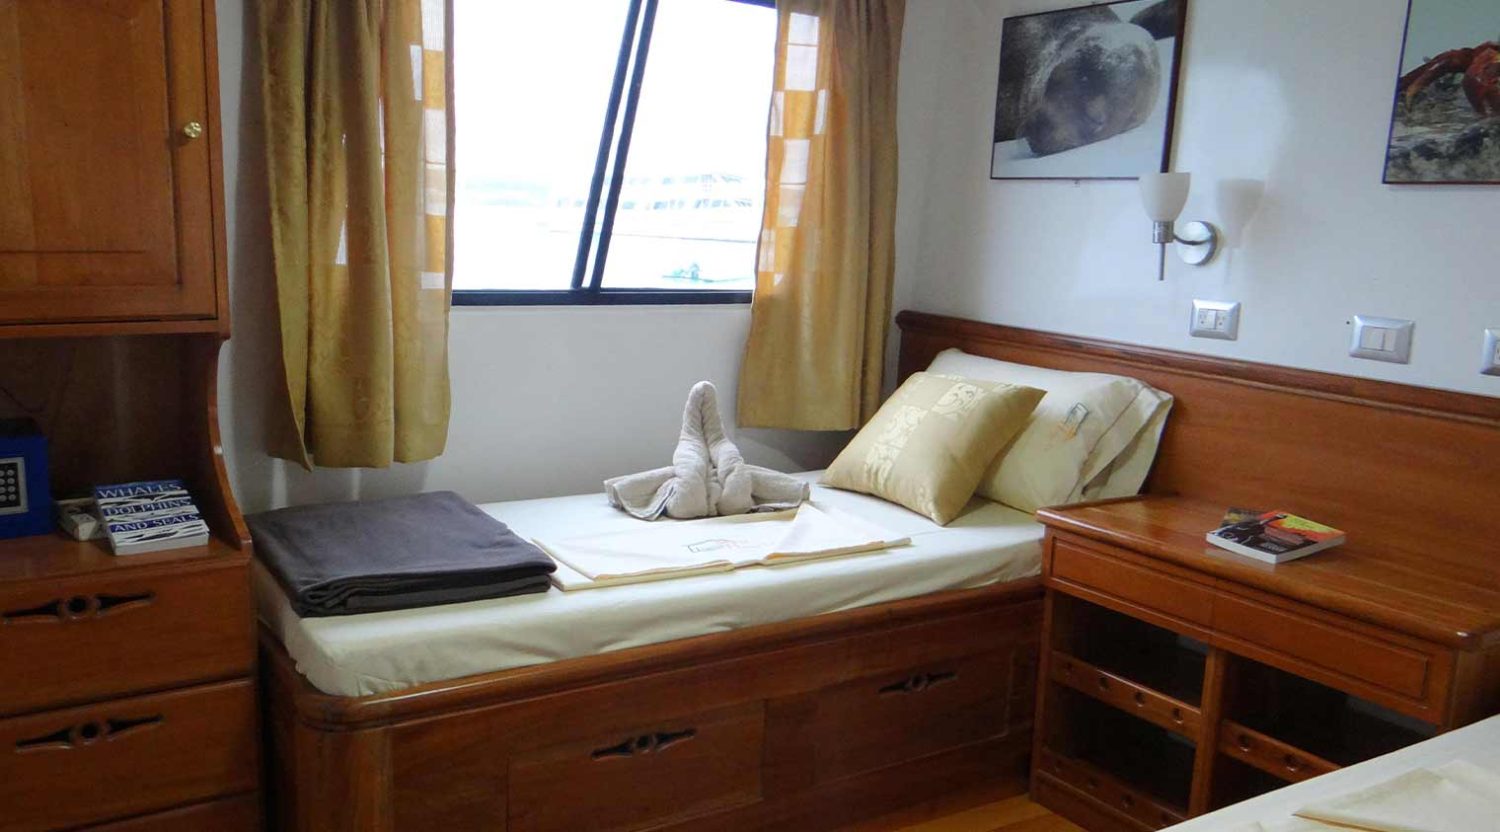 double bed bedroom of angelito yacht of galapagos islands